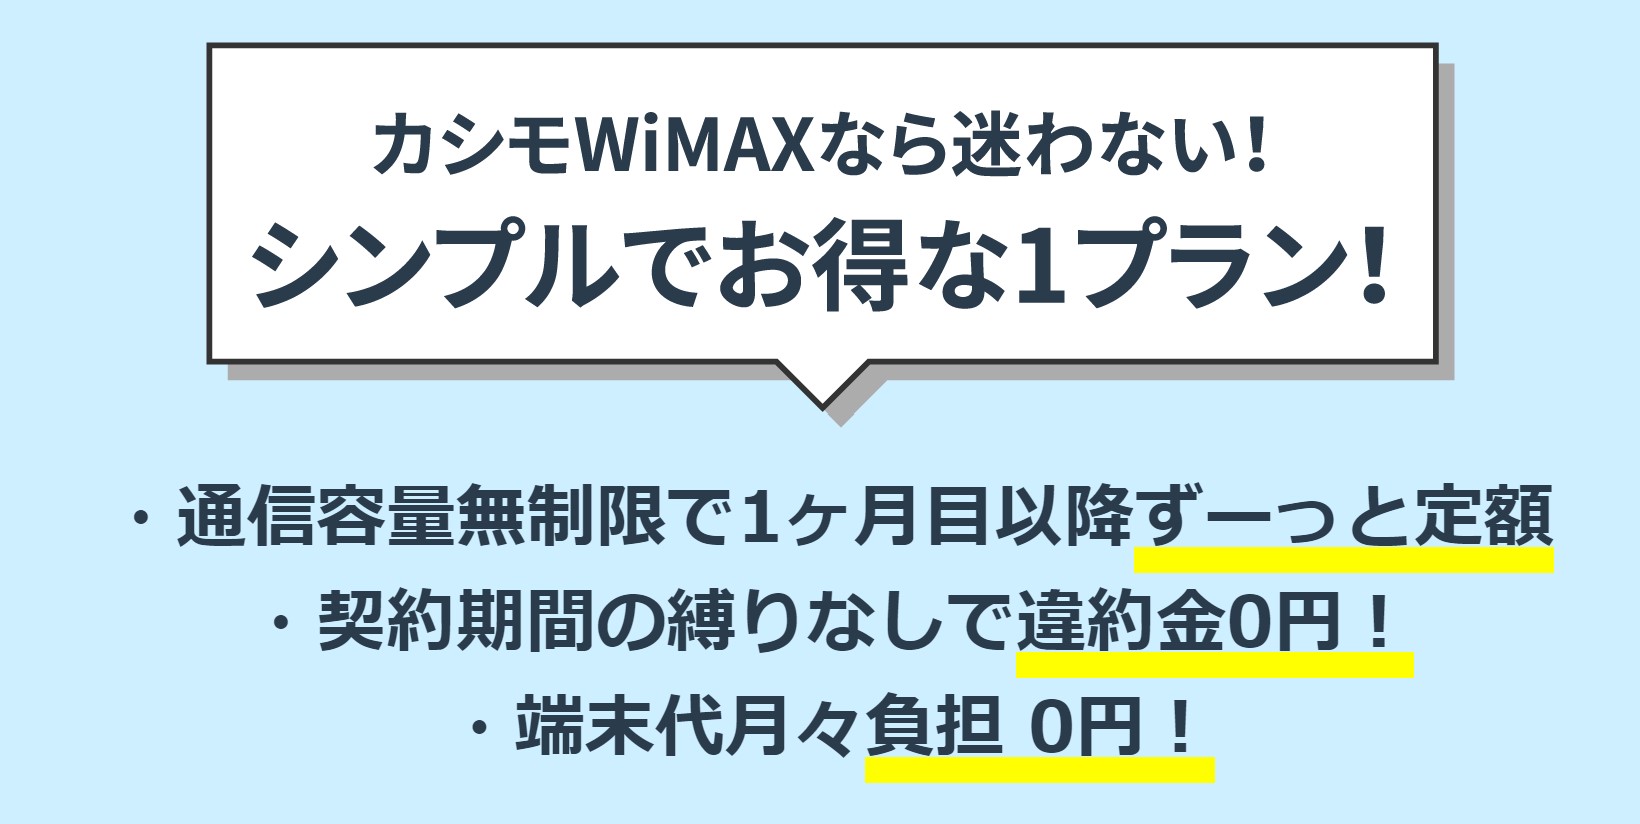 WIMAX7